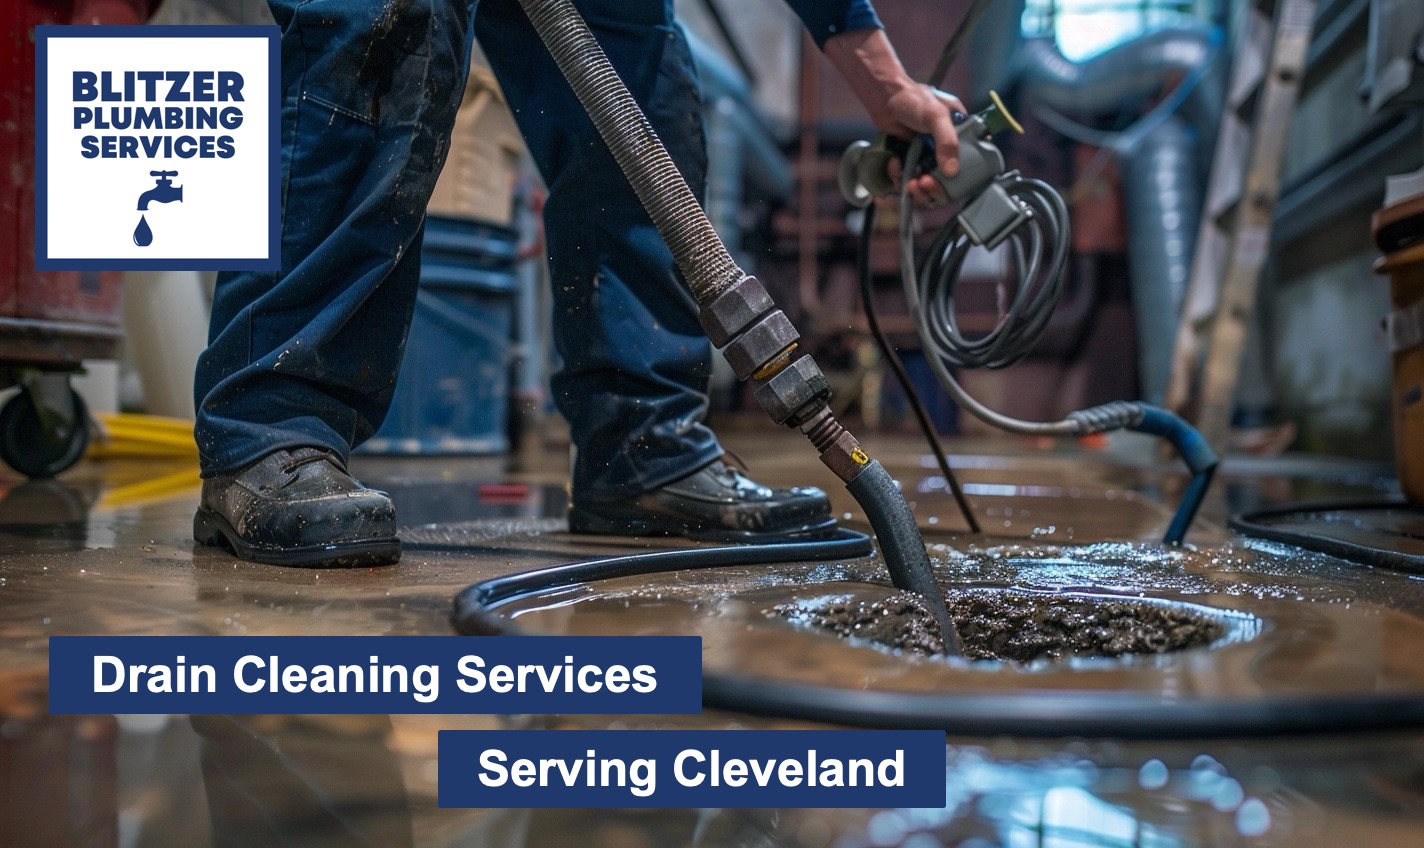 Affordable drain cleaning Cleveland - experts to unblock your drians, remove debris from drains and root our problems.